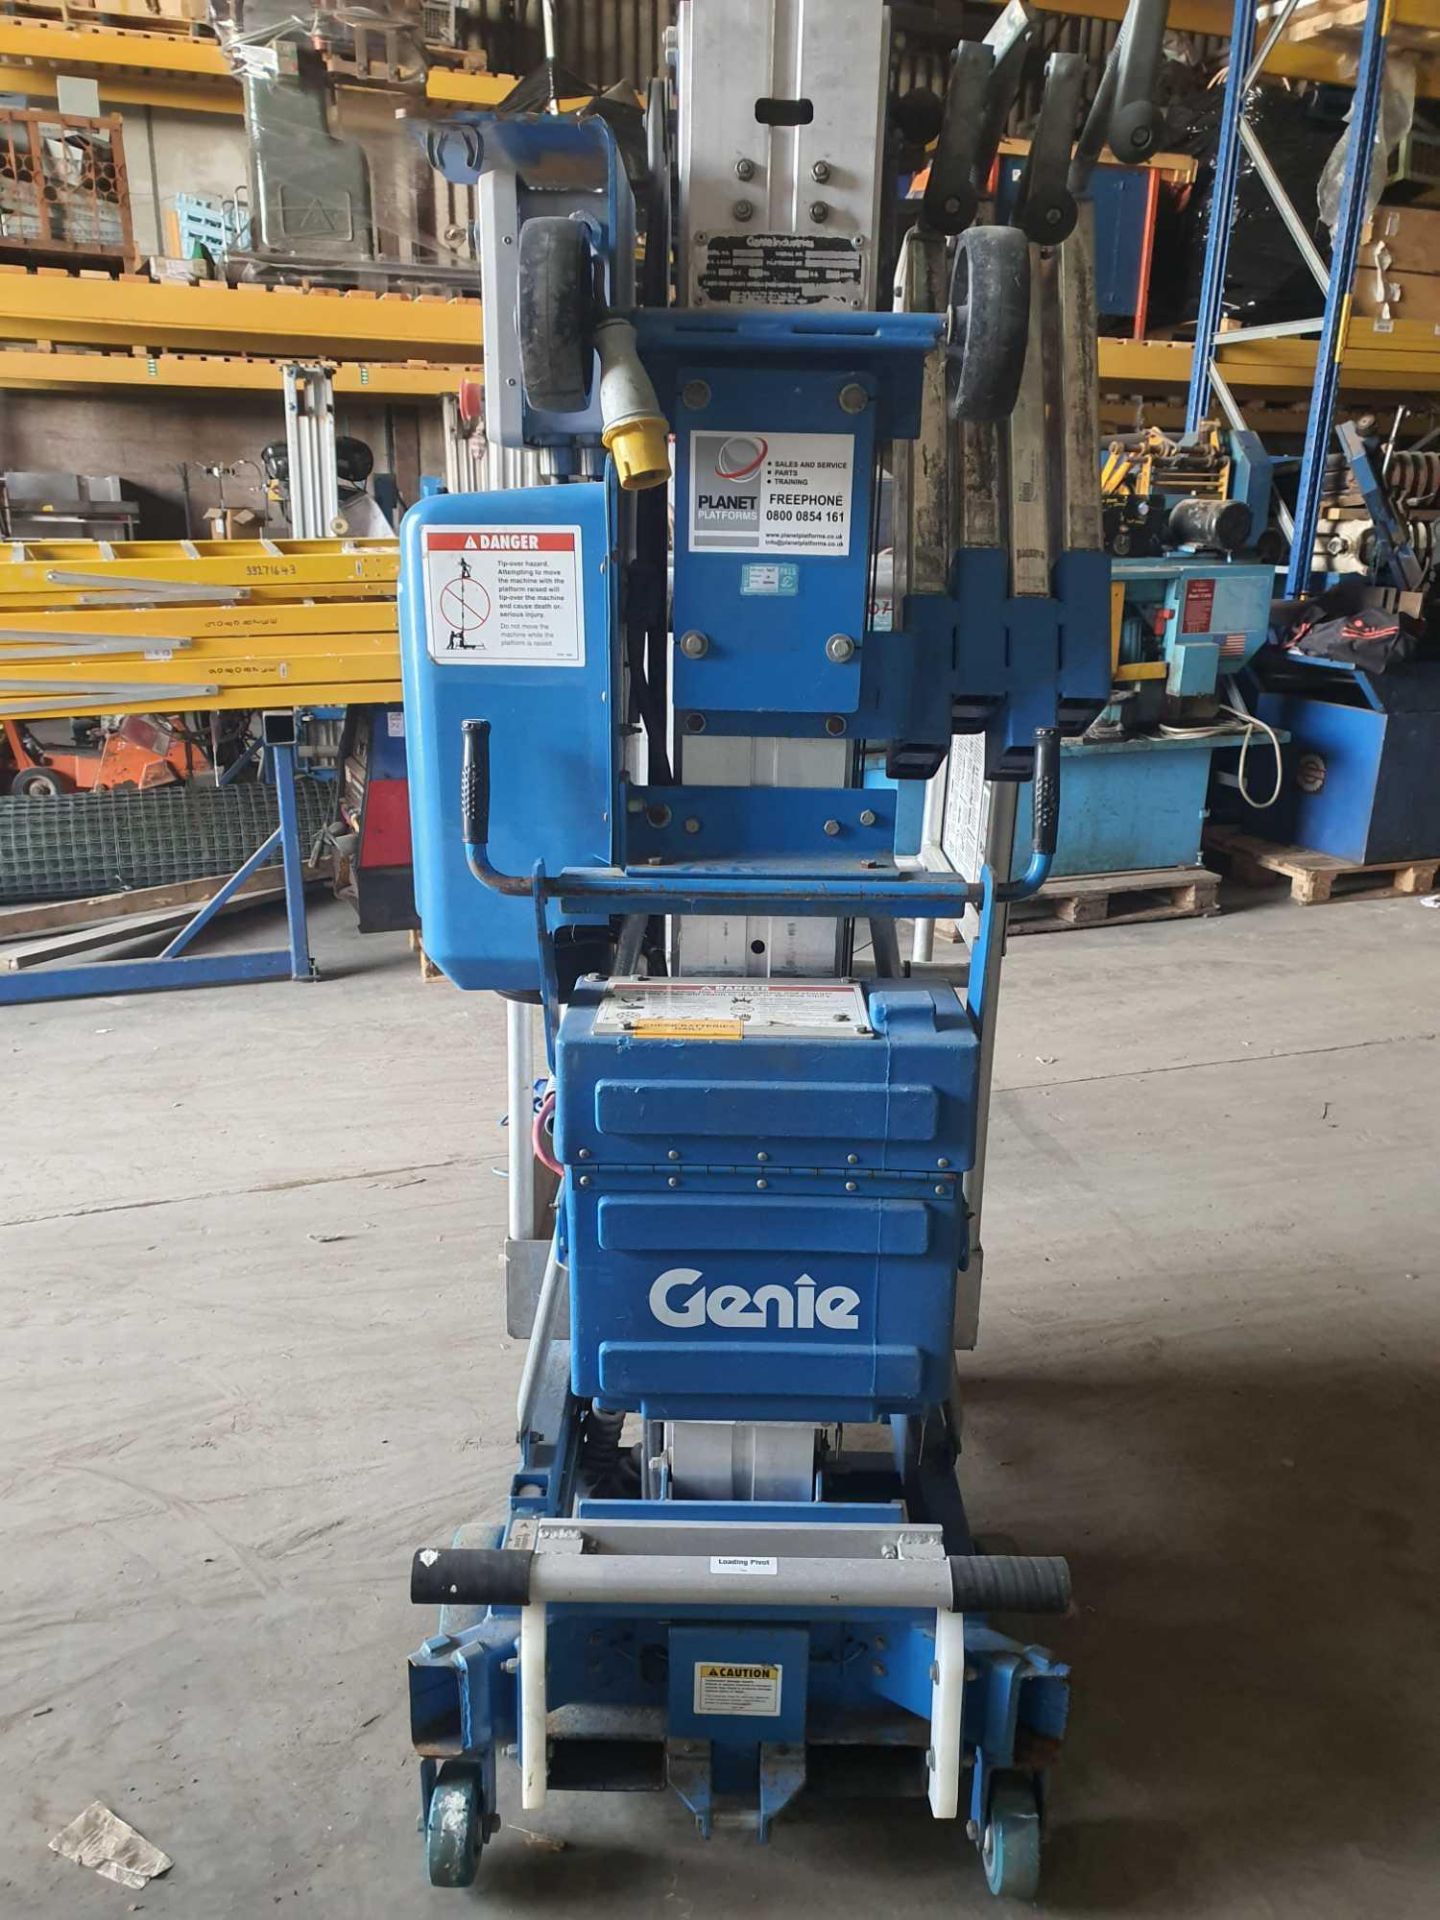 Genie awp 24 electric lift - Image 2 of 4